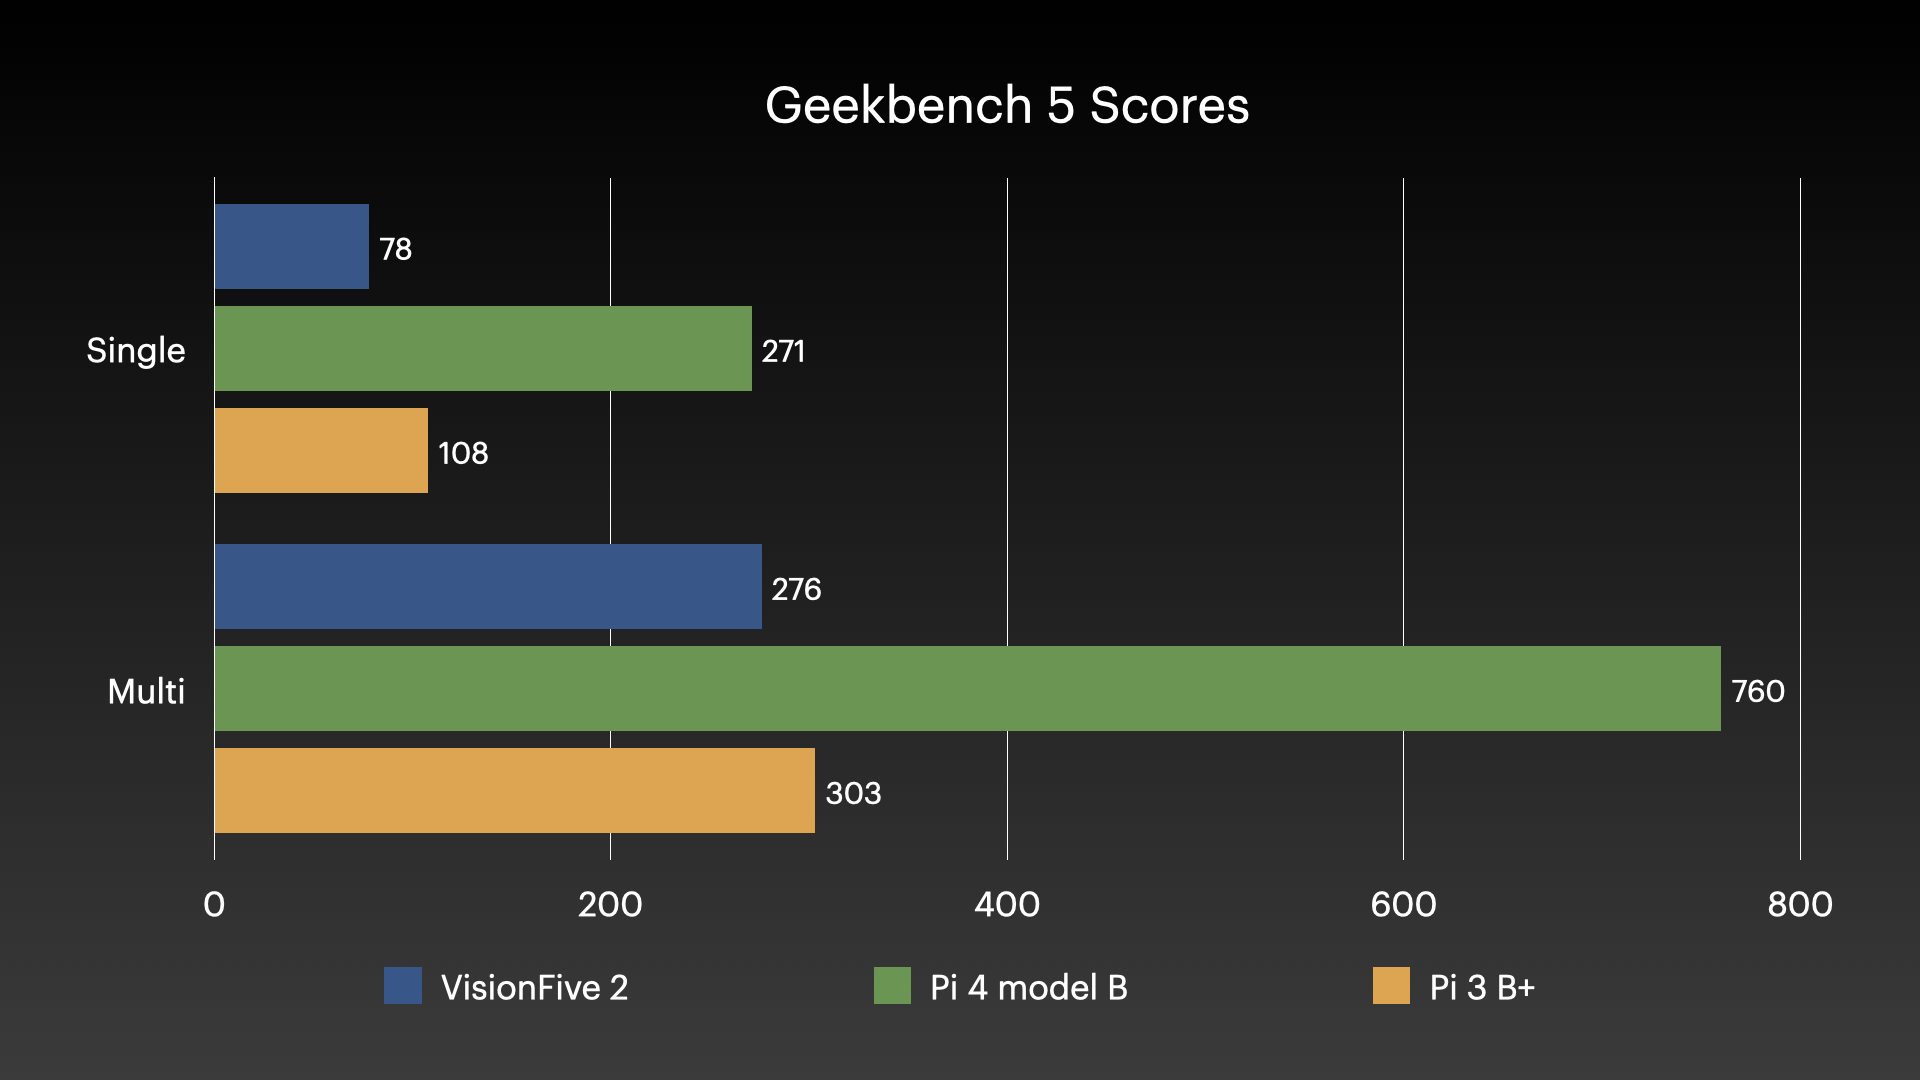 VisionFive 2 Geekbench benchmarks